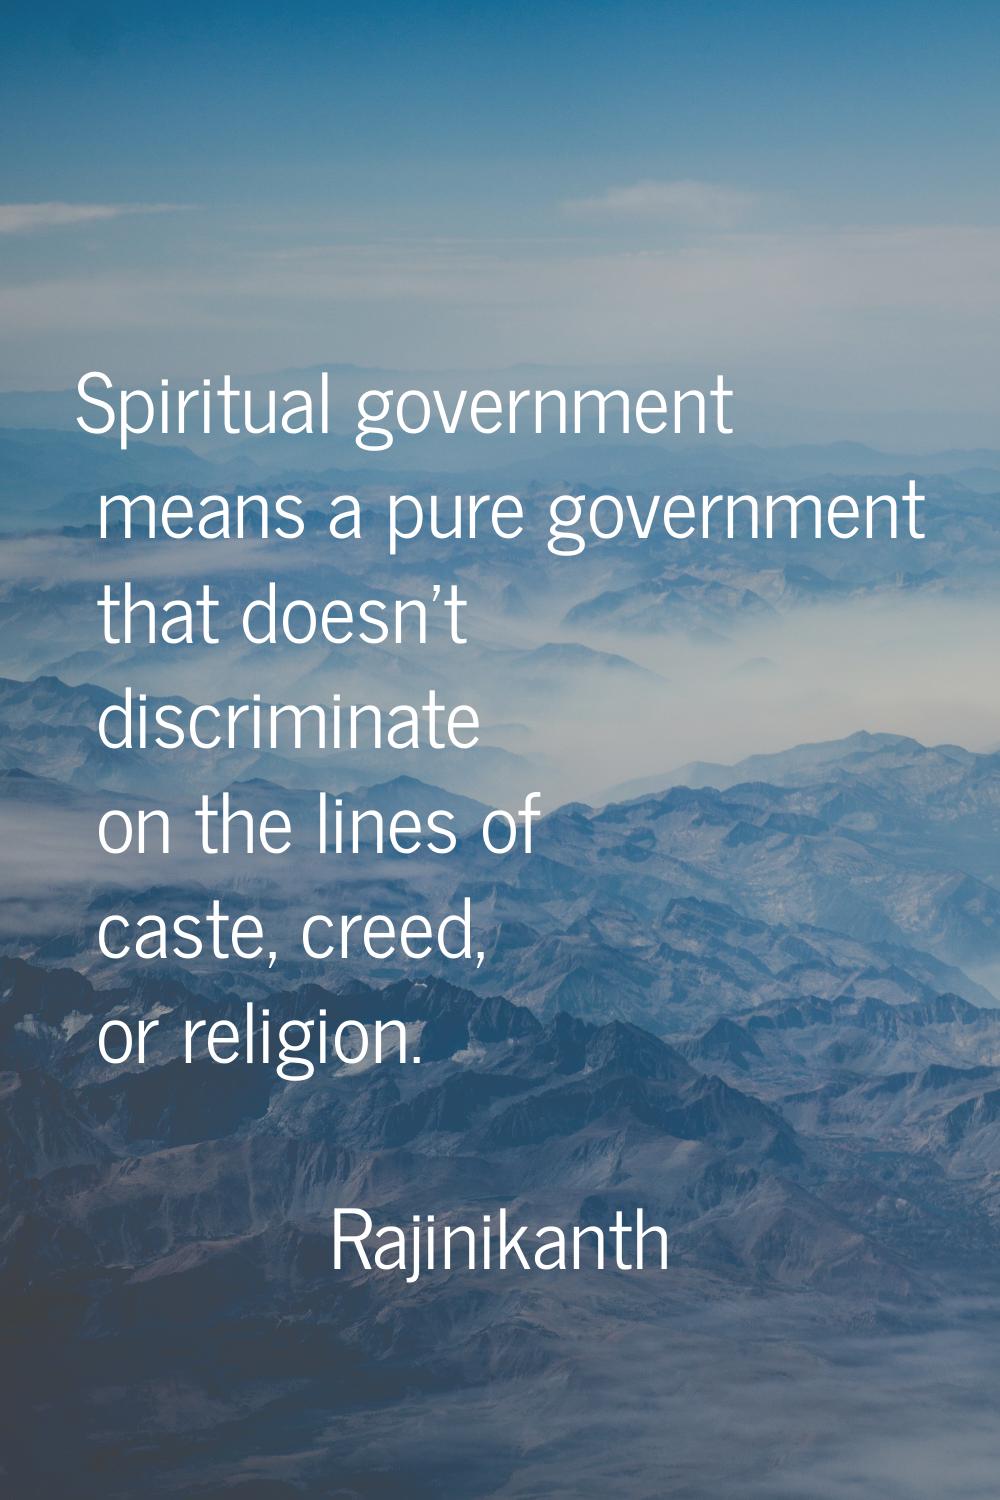 Spiritual government means a pure government that doesn't discriminate on the lines of caste, creed